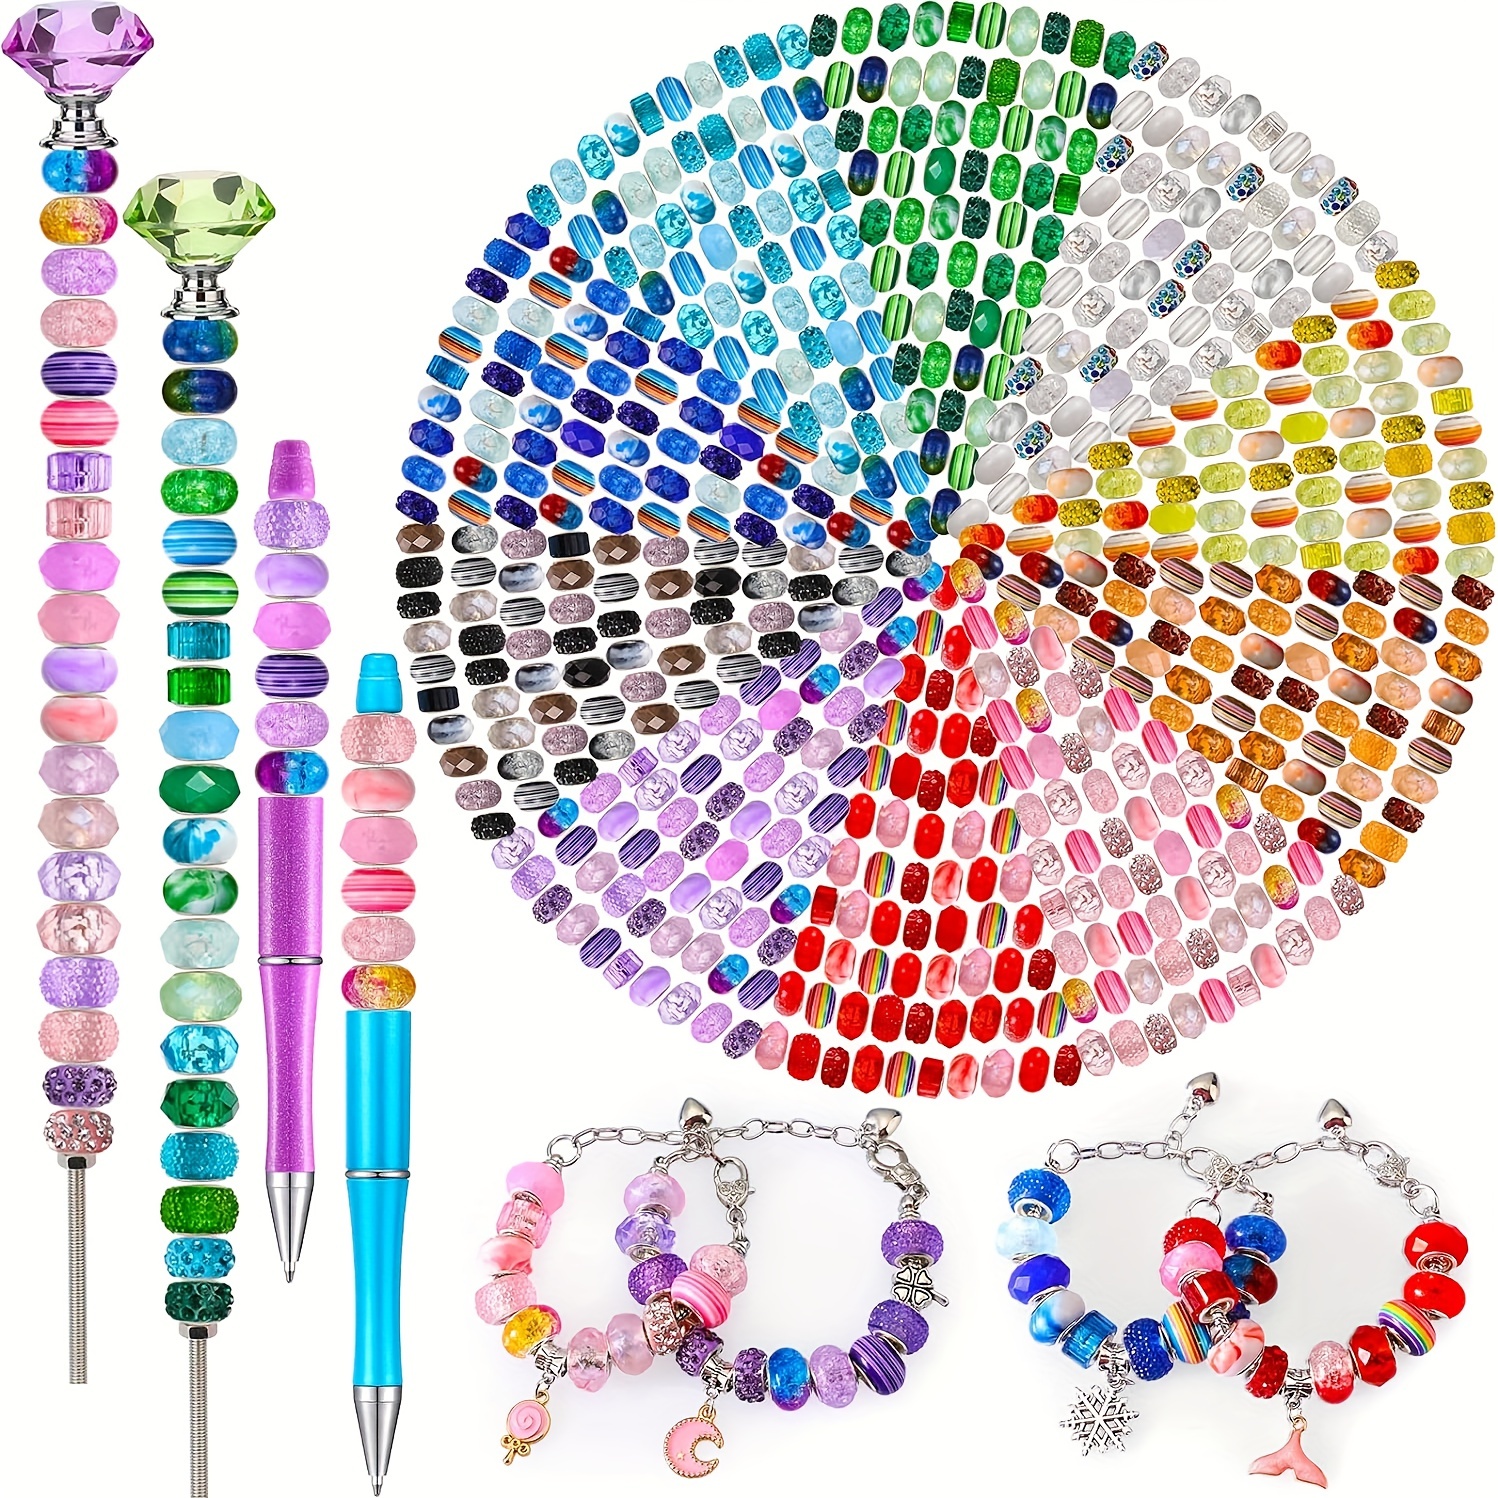 

Bulk Piece Of 30 Multicolor Acrylic Spacer Beads With Large Holes, 12mm Rhinestone-embellished Beads For Diy Pens, Keychains & Jewelry Crafting